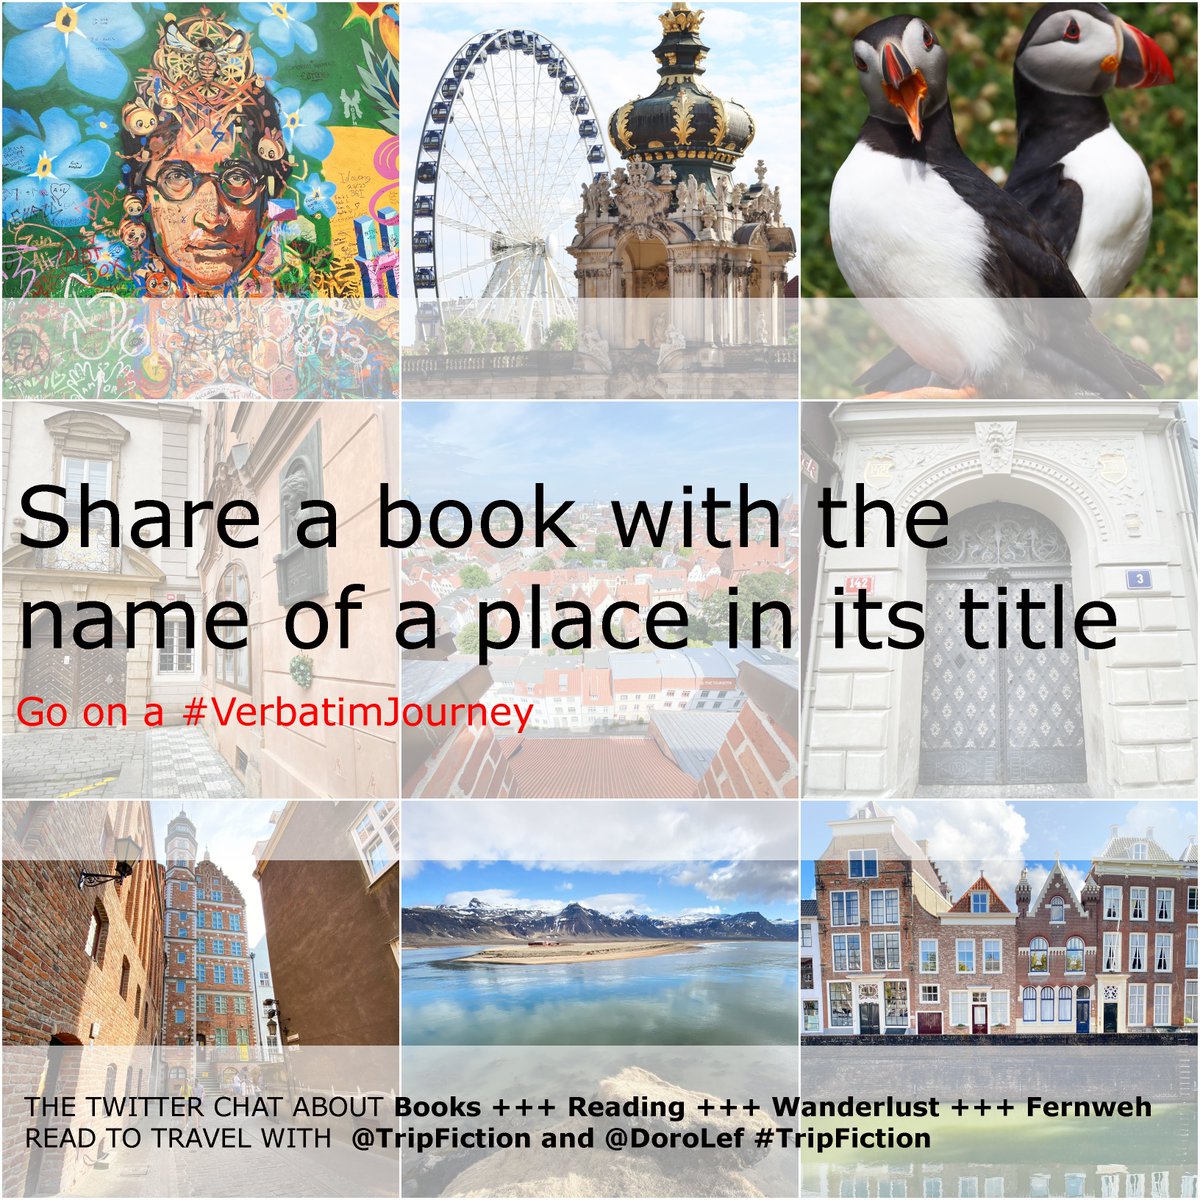 Let's go on a #VerbatimJourney together with @TripFiction and @DoroLef

+++

Share a book with the name of a place in its title.

+++

#TripFiction #BookTwitter #TravelTheWorld